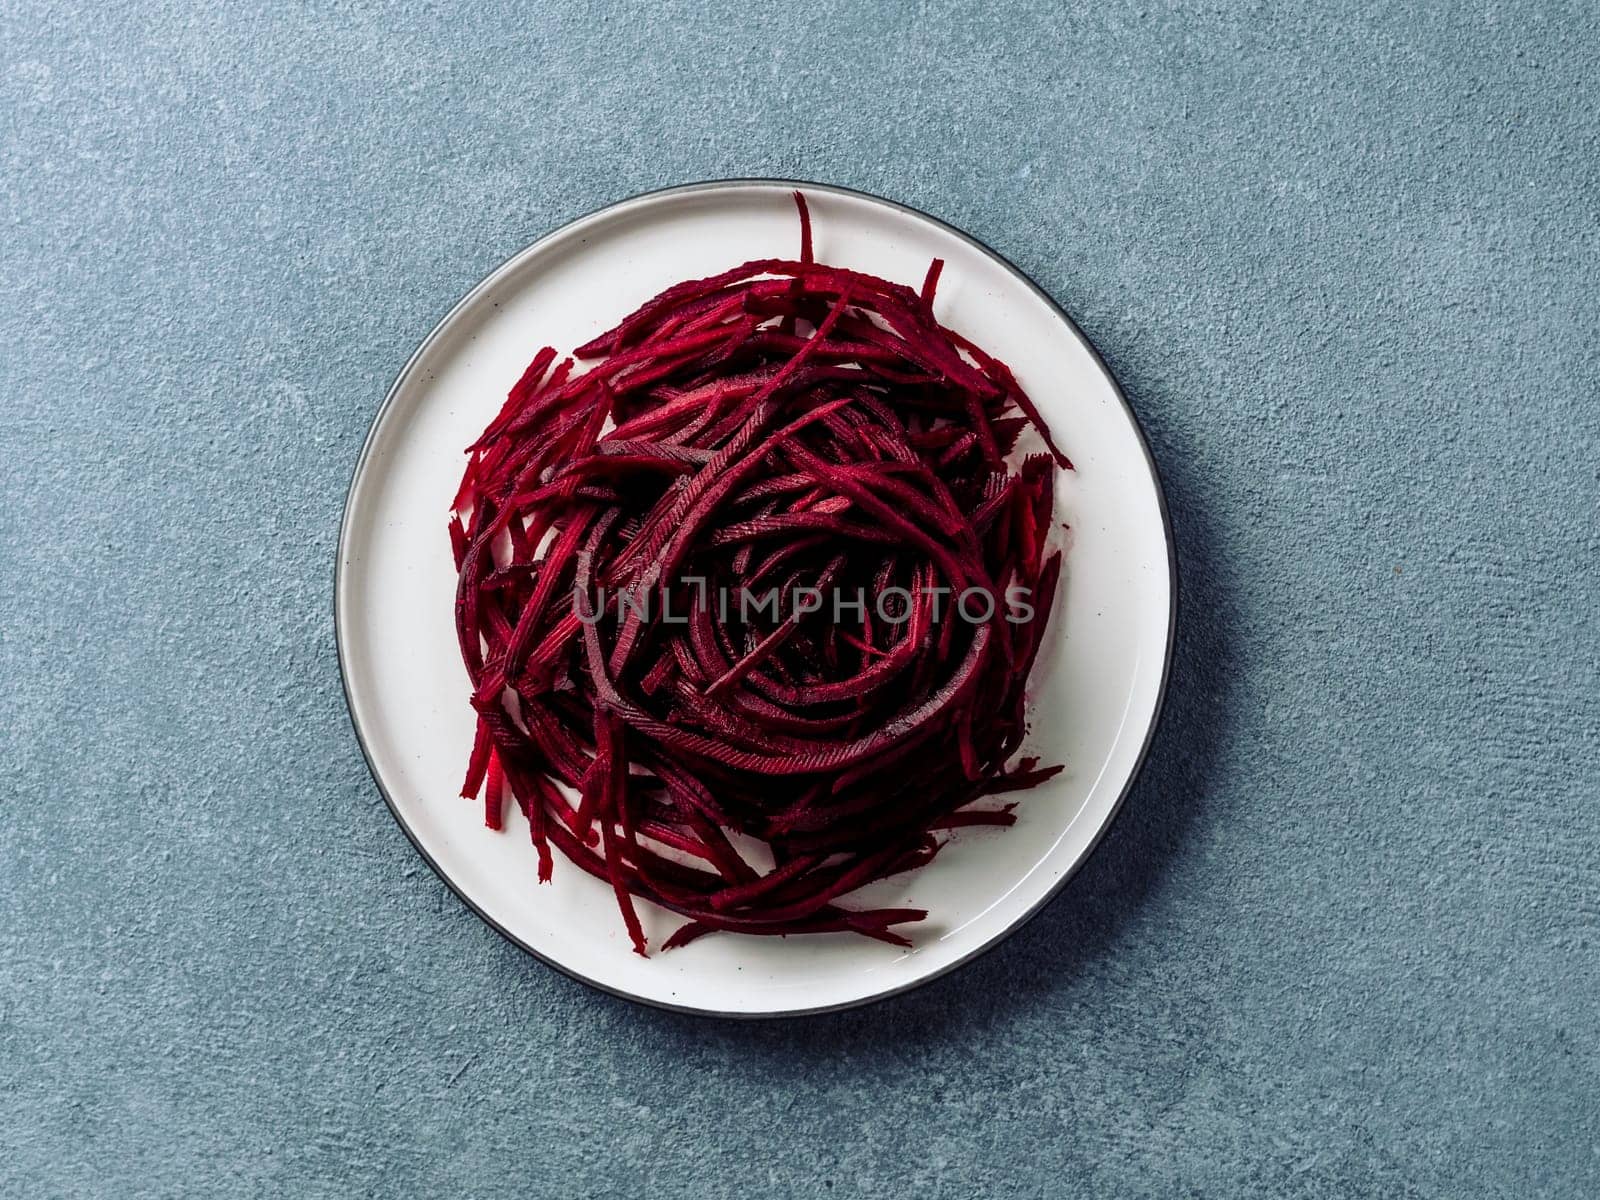 Raw beetroot noodles top view. Vegetable noodles - beet spaghetti on plate over stone background. Clean eating, raw vegetarian food concept.